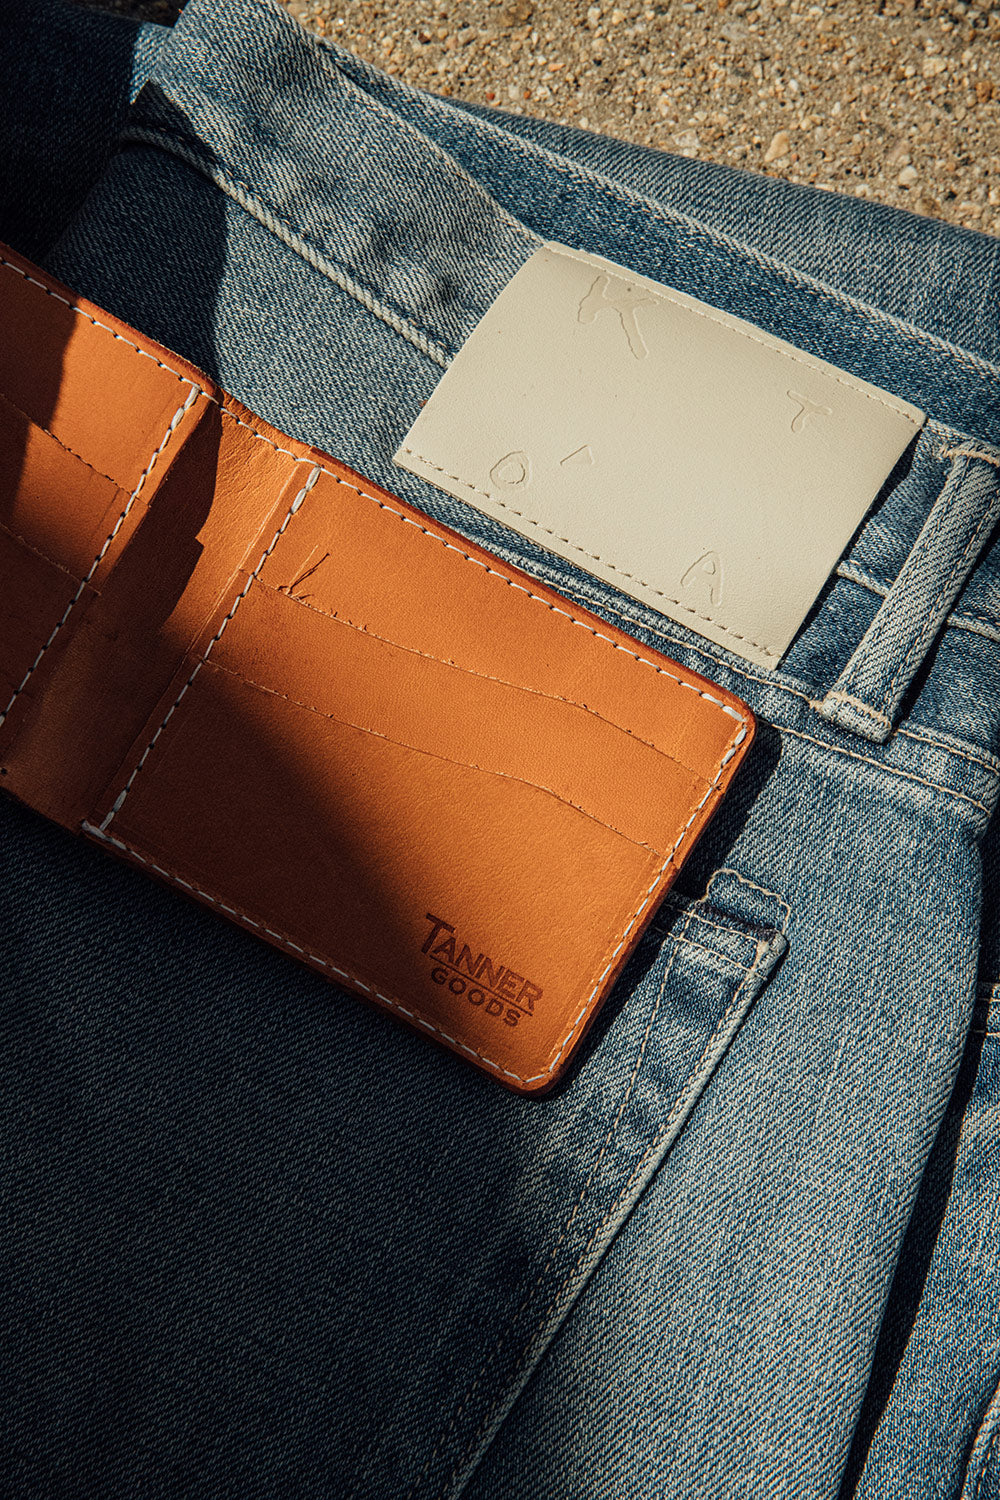 An open Tanner Goods Bifold laying on the back of a pair of KATO light colored denim.